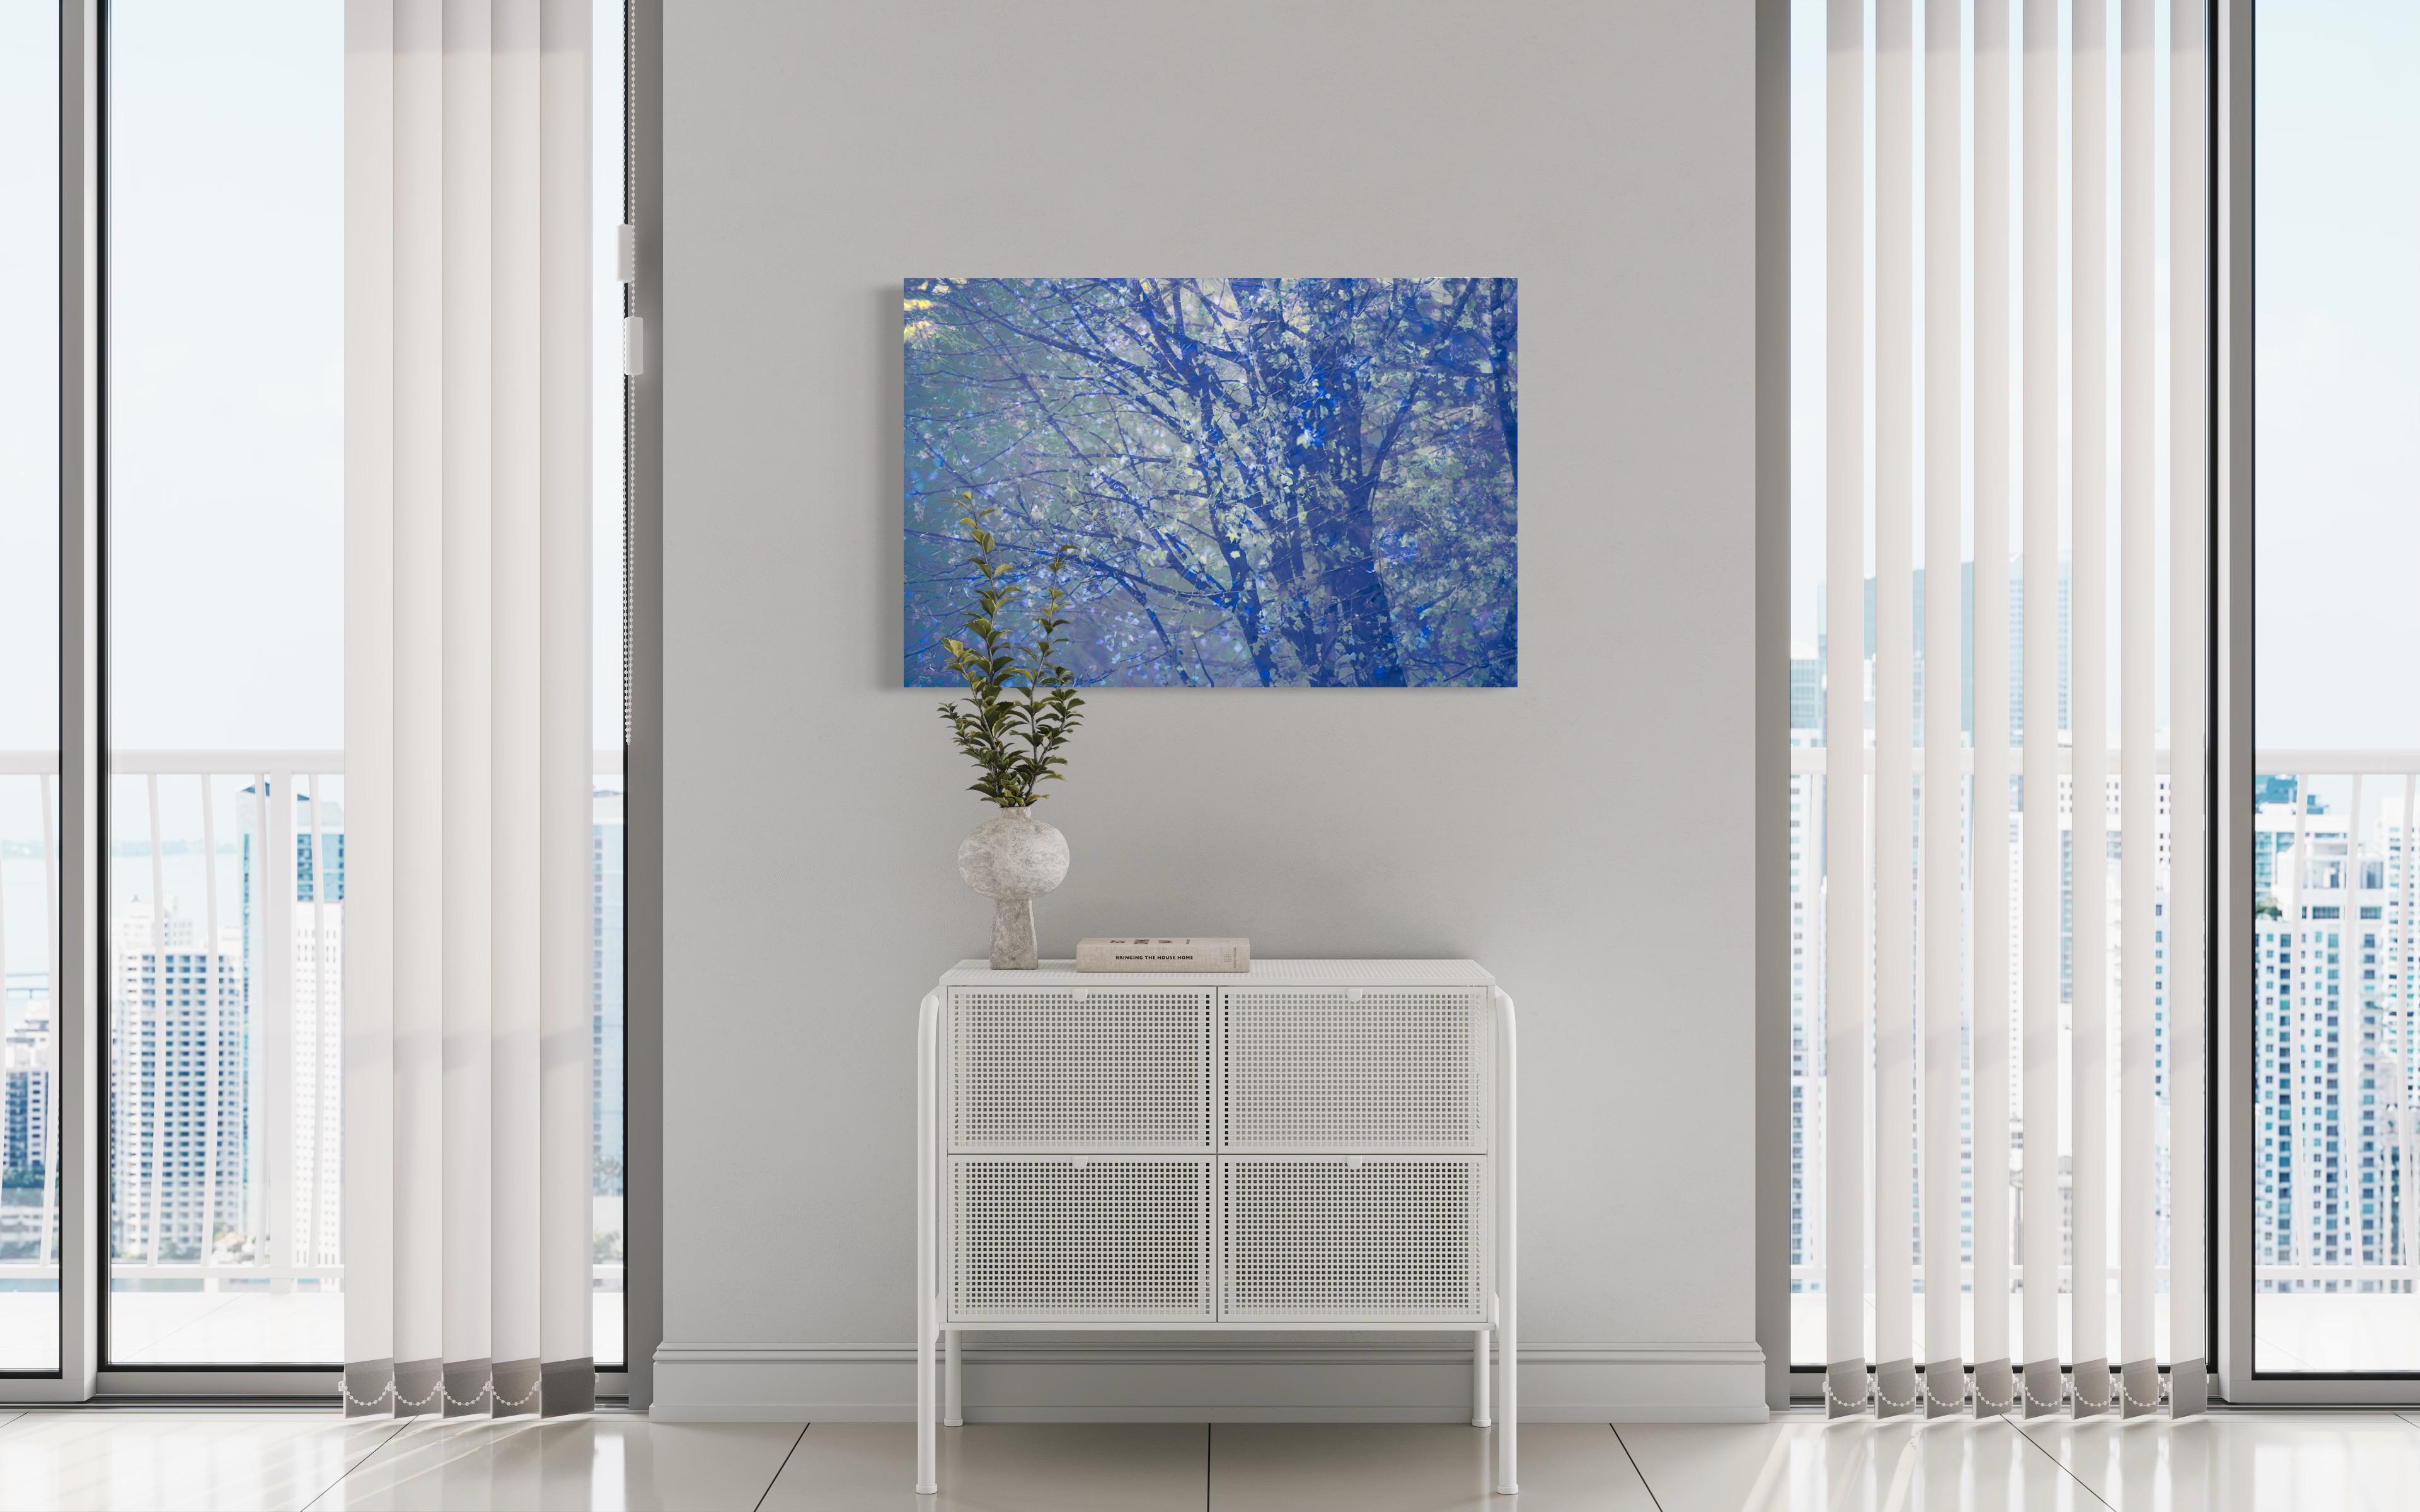 This abstract photograph by Tori Gagne features a cool blue palette with an abstracted view of tree branches. An edition size of 25, this photograph is available as a metal sublimation print with a 1.3” deep silver flush mount frame and white gloss